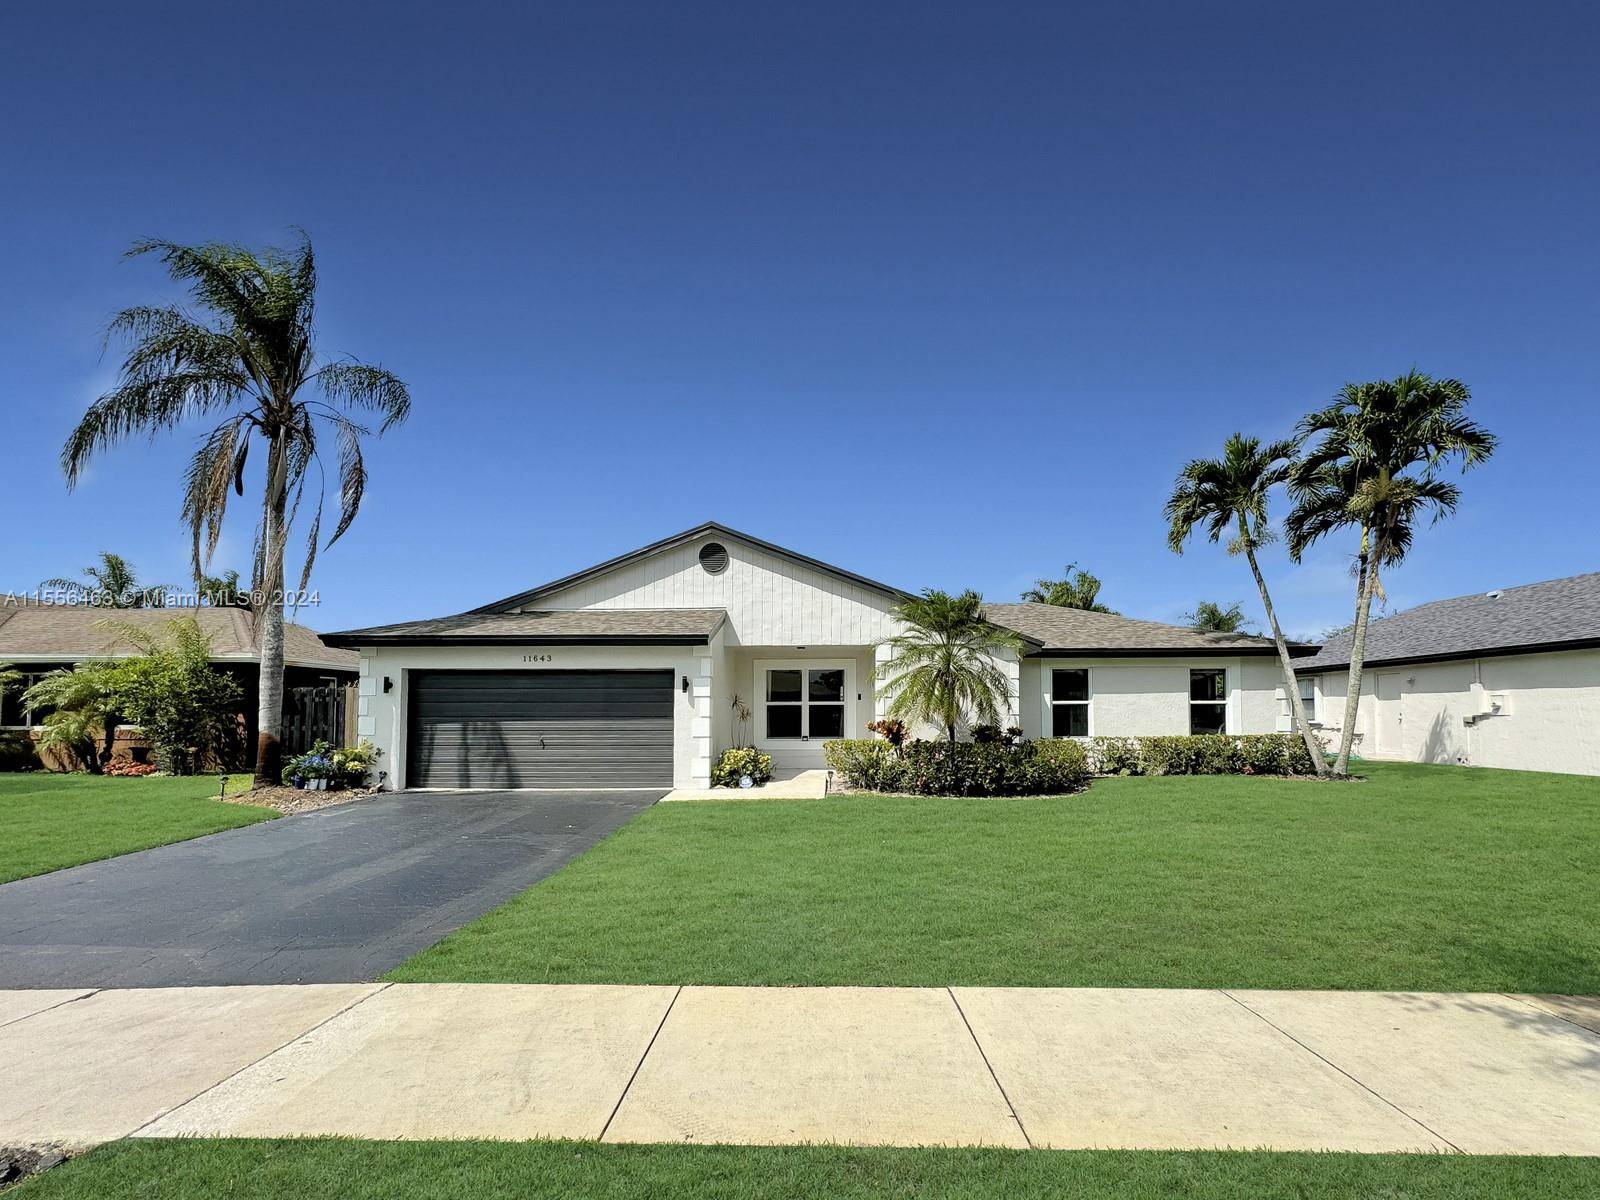 IMAGINE YOURSELF IN THIS STUNNING 3 BED, 2 BATH HOME IN SOUGHT AFTER FLAMINGO GARDENS.